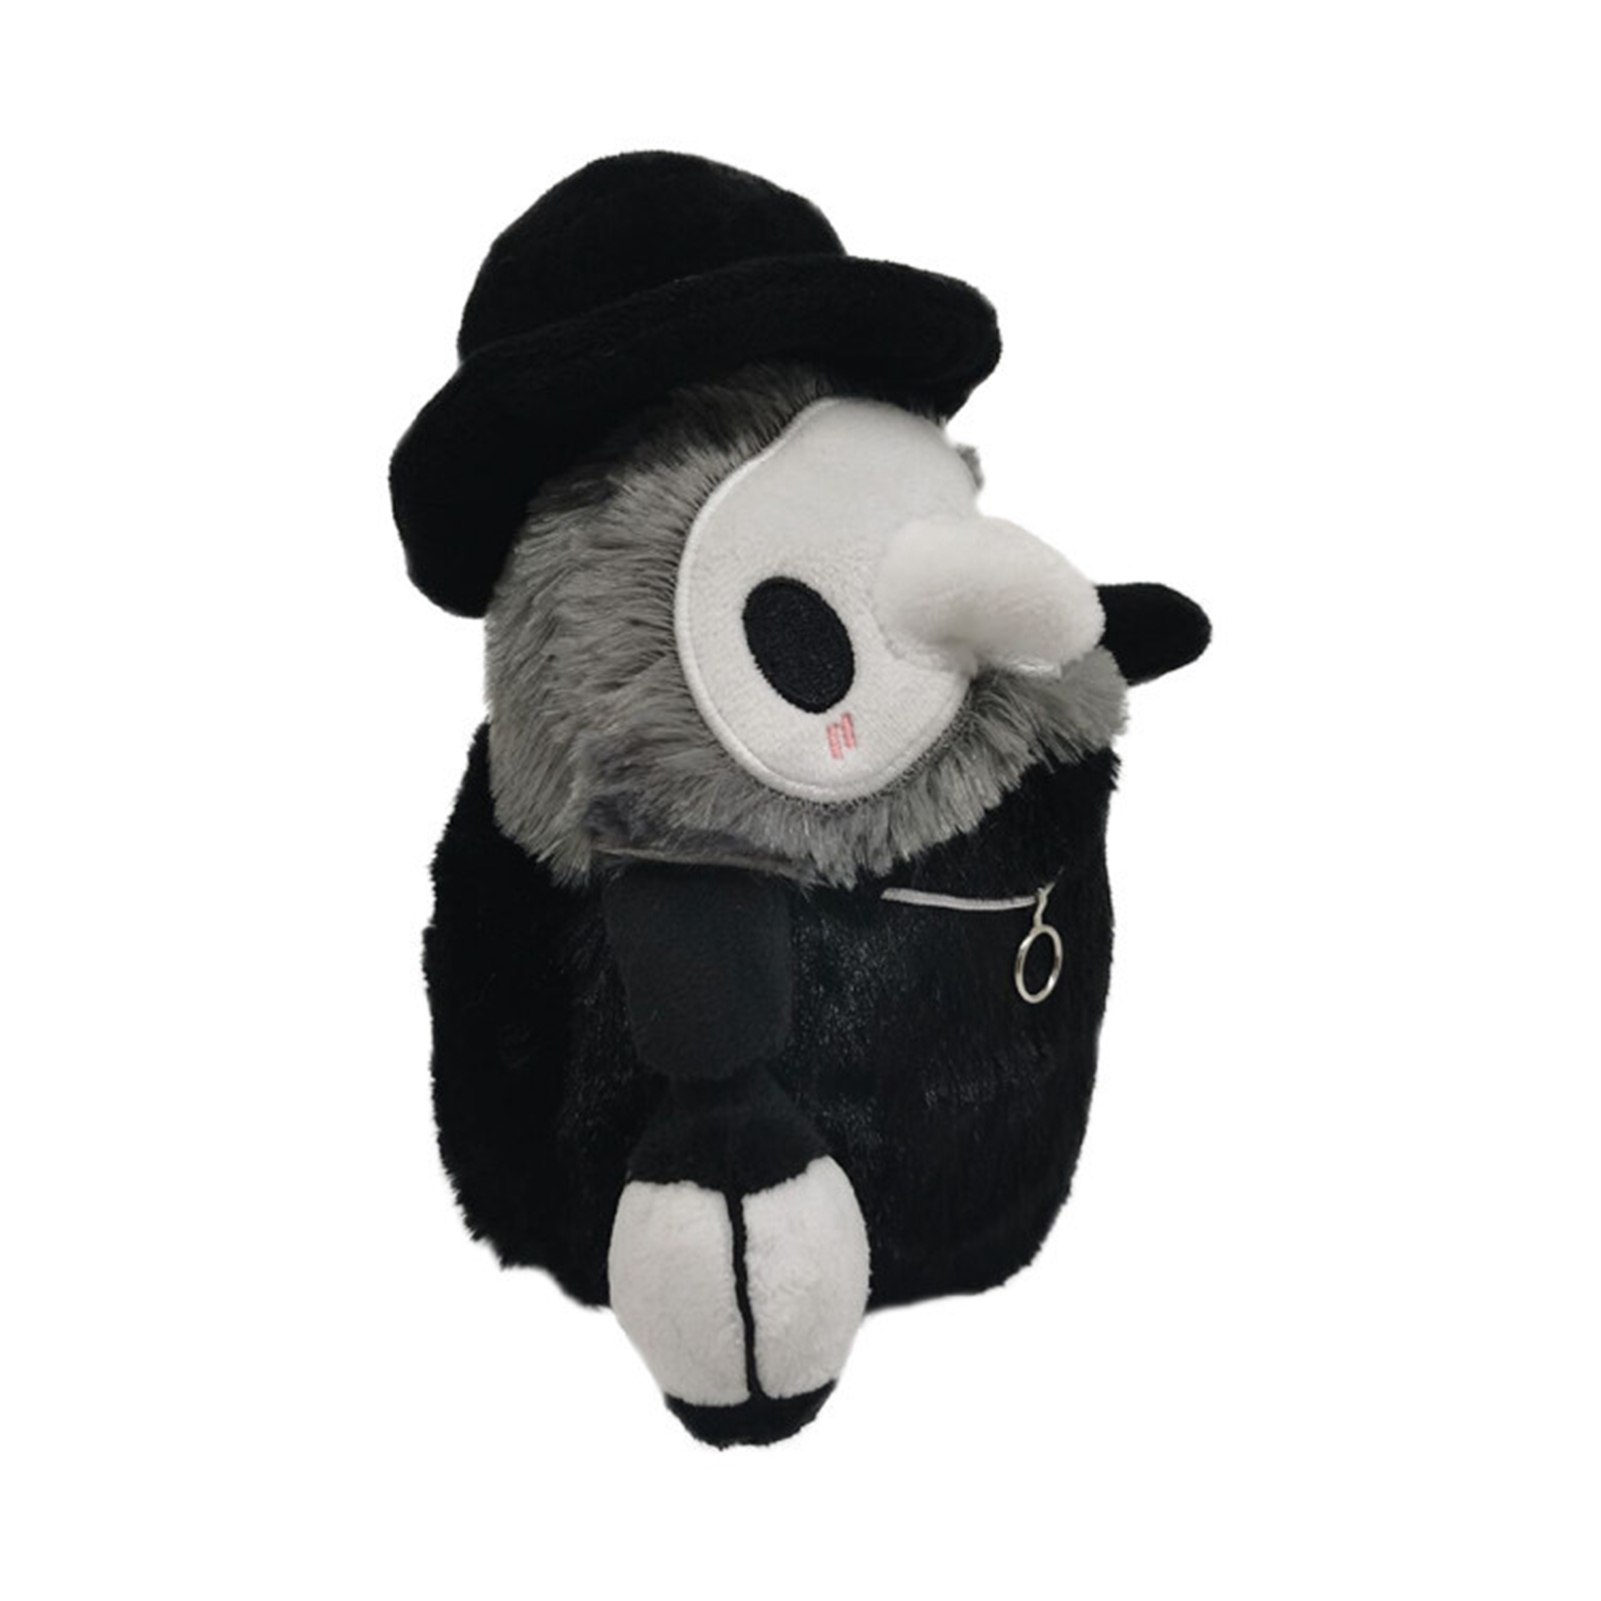 Props Hand GLOW IN DARK Plague Doctor Toys Soft Plush Doll 20cm Halloween Gift 